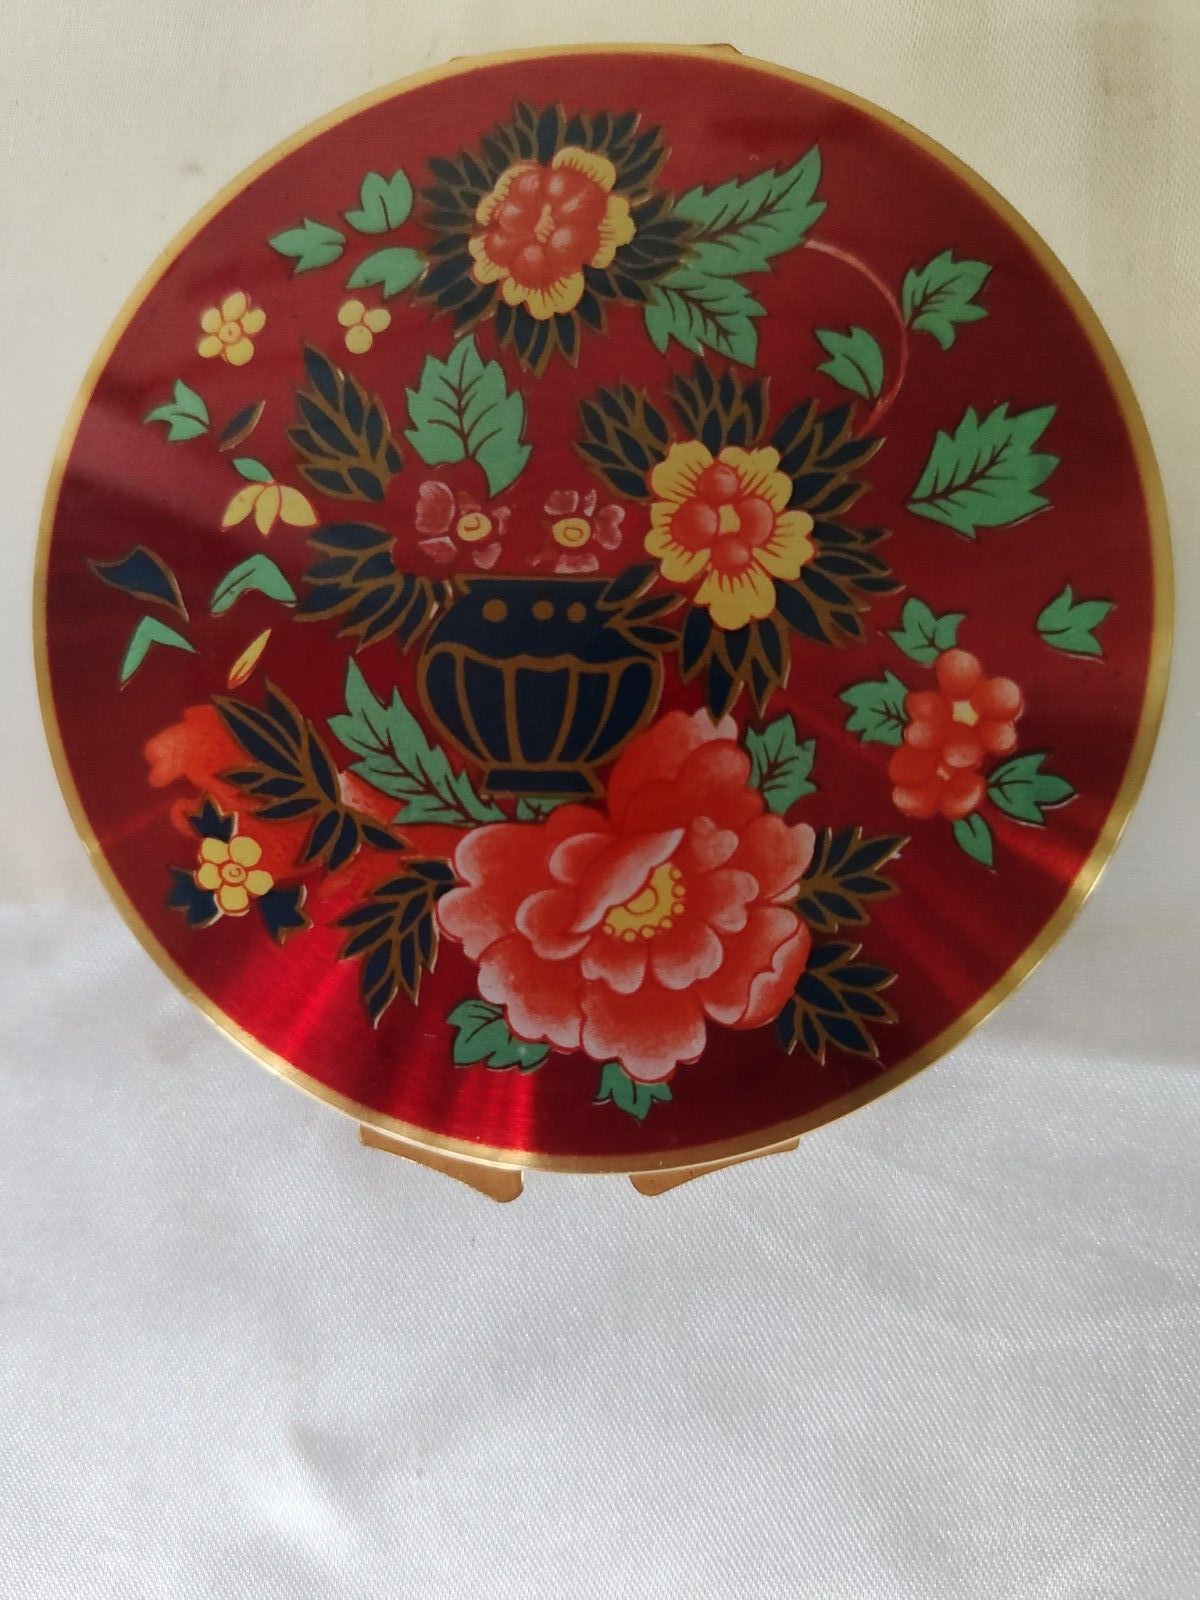 Vintage Stratton Double Mirror Beautiful Compact Red Floral